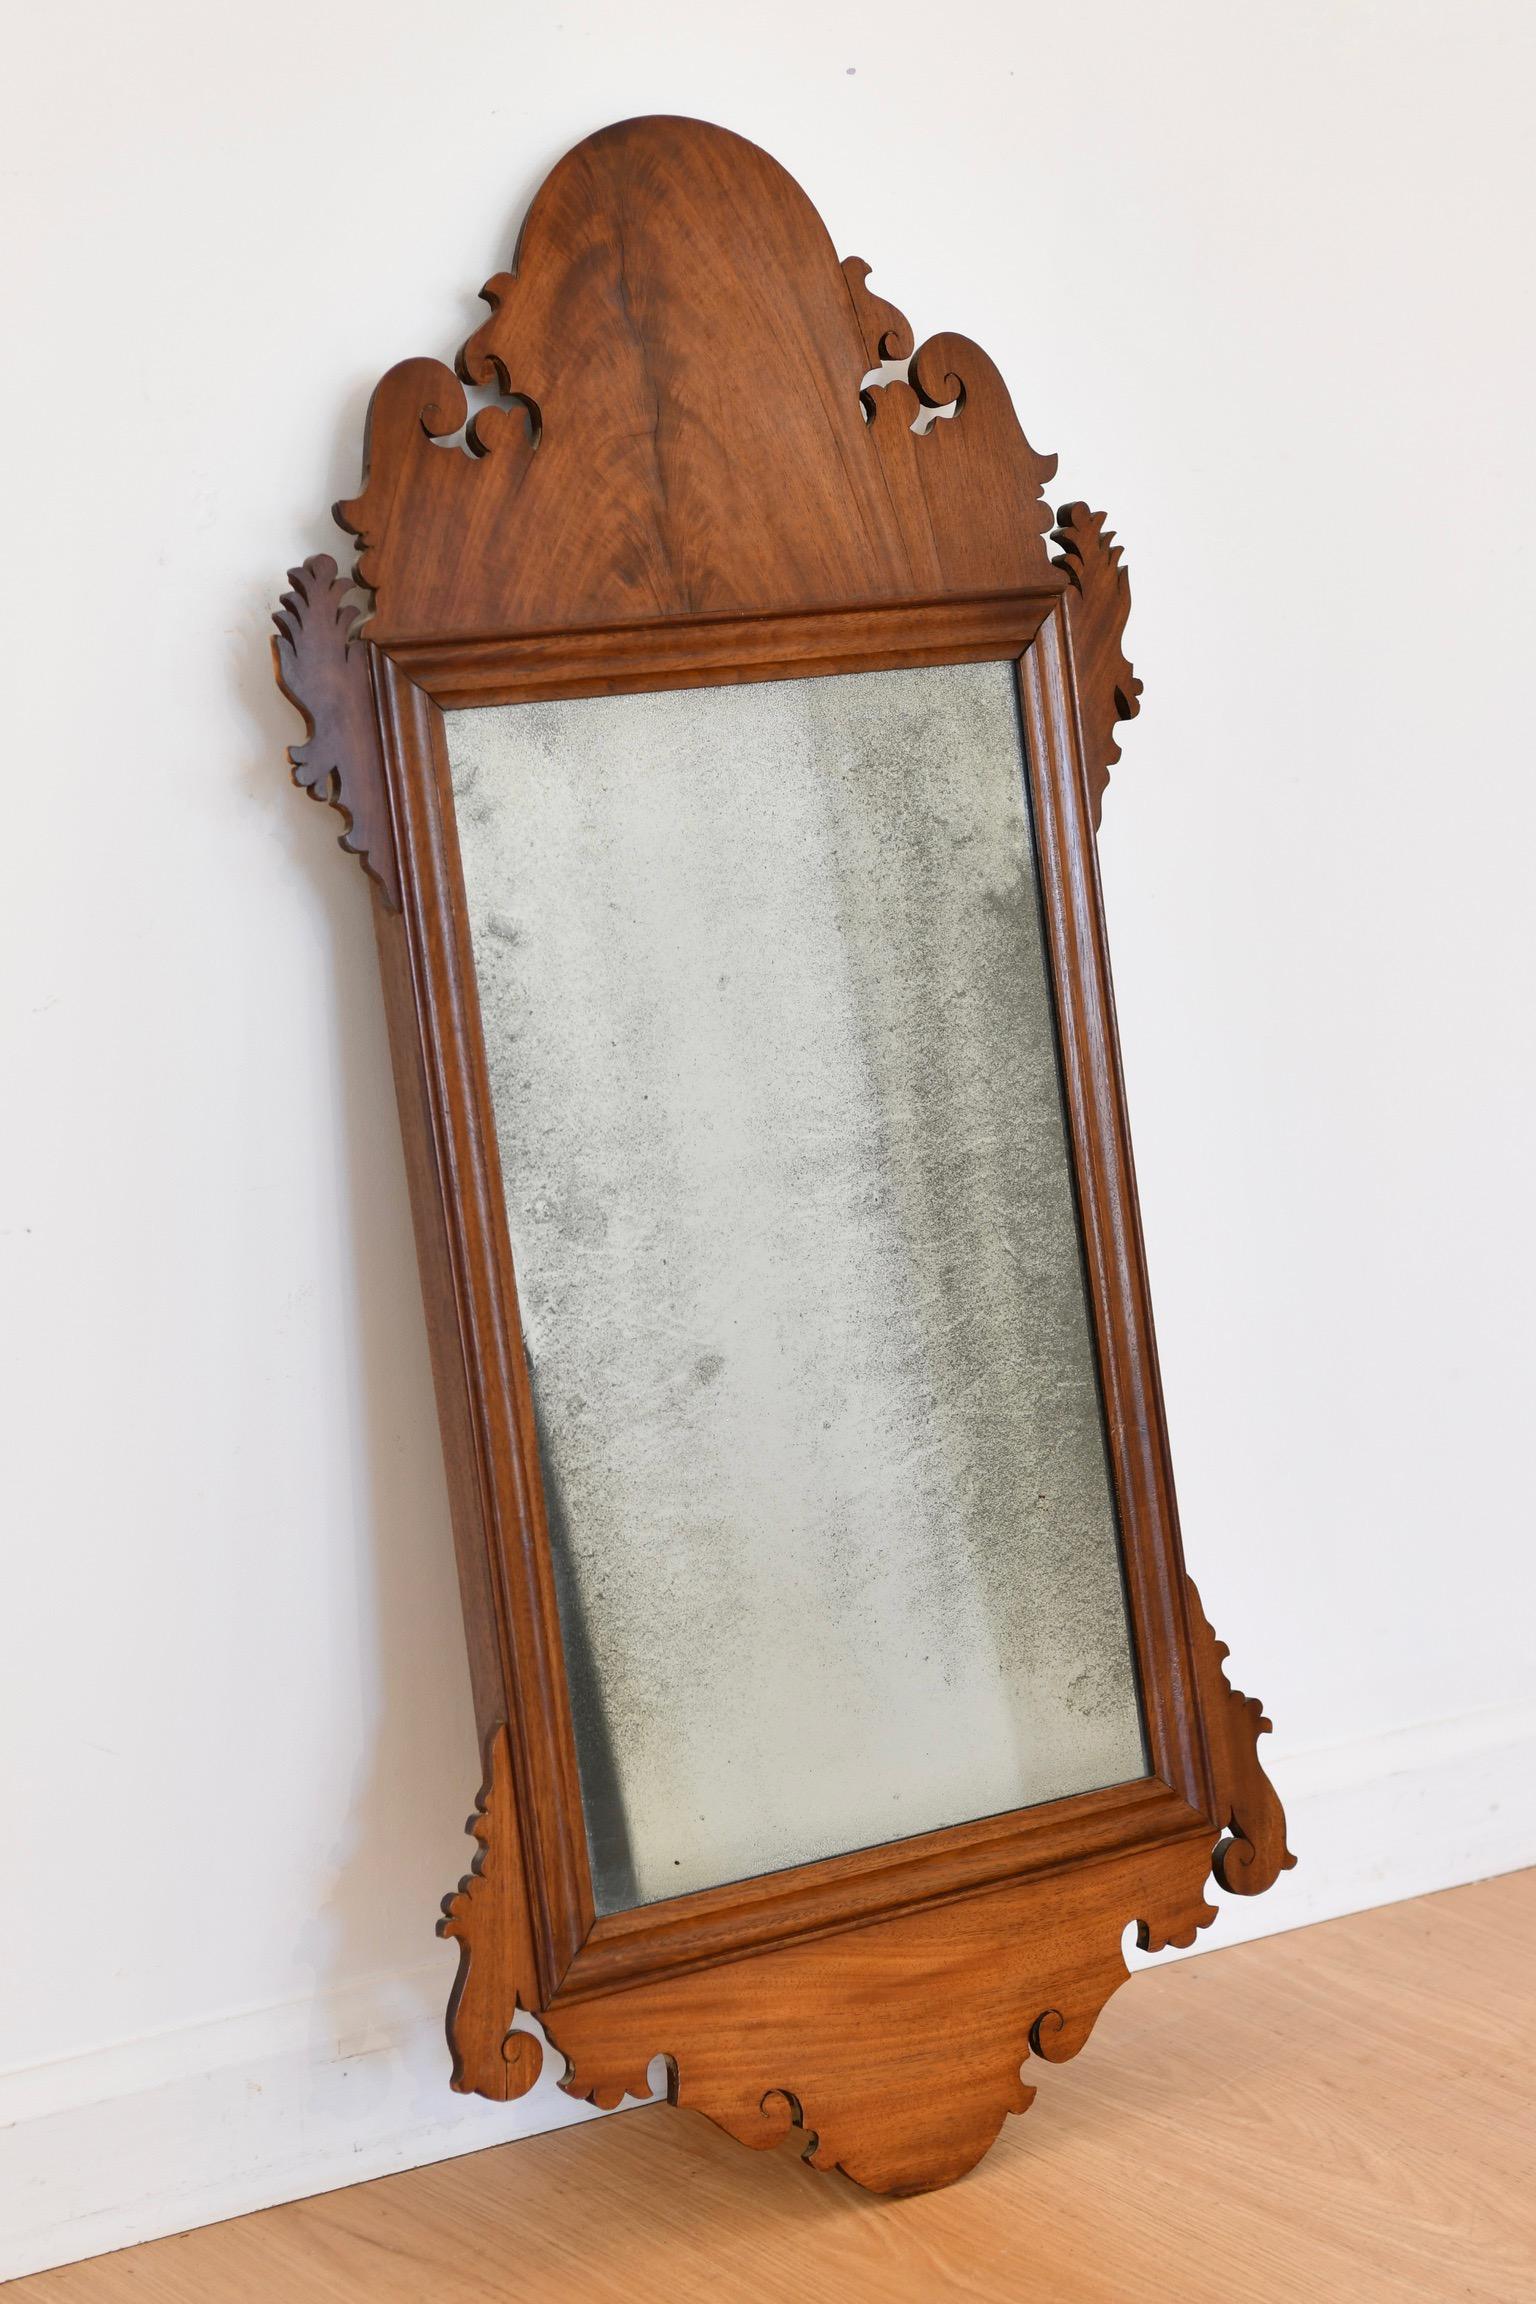 Antique Chippendale mahogany fret carved mirror, attributed to the workshop of John Elliott, Philadelphia, circa mid to late 18th century. Provenance: Property from a Chesty County, Pennsylvania Estate. Dimensions: 35